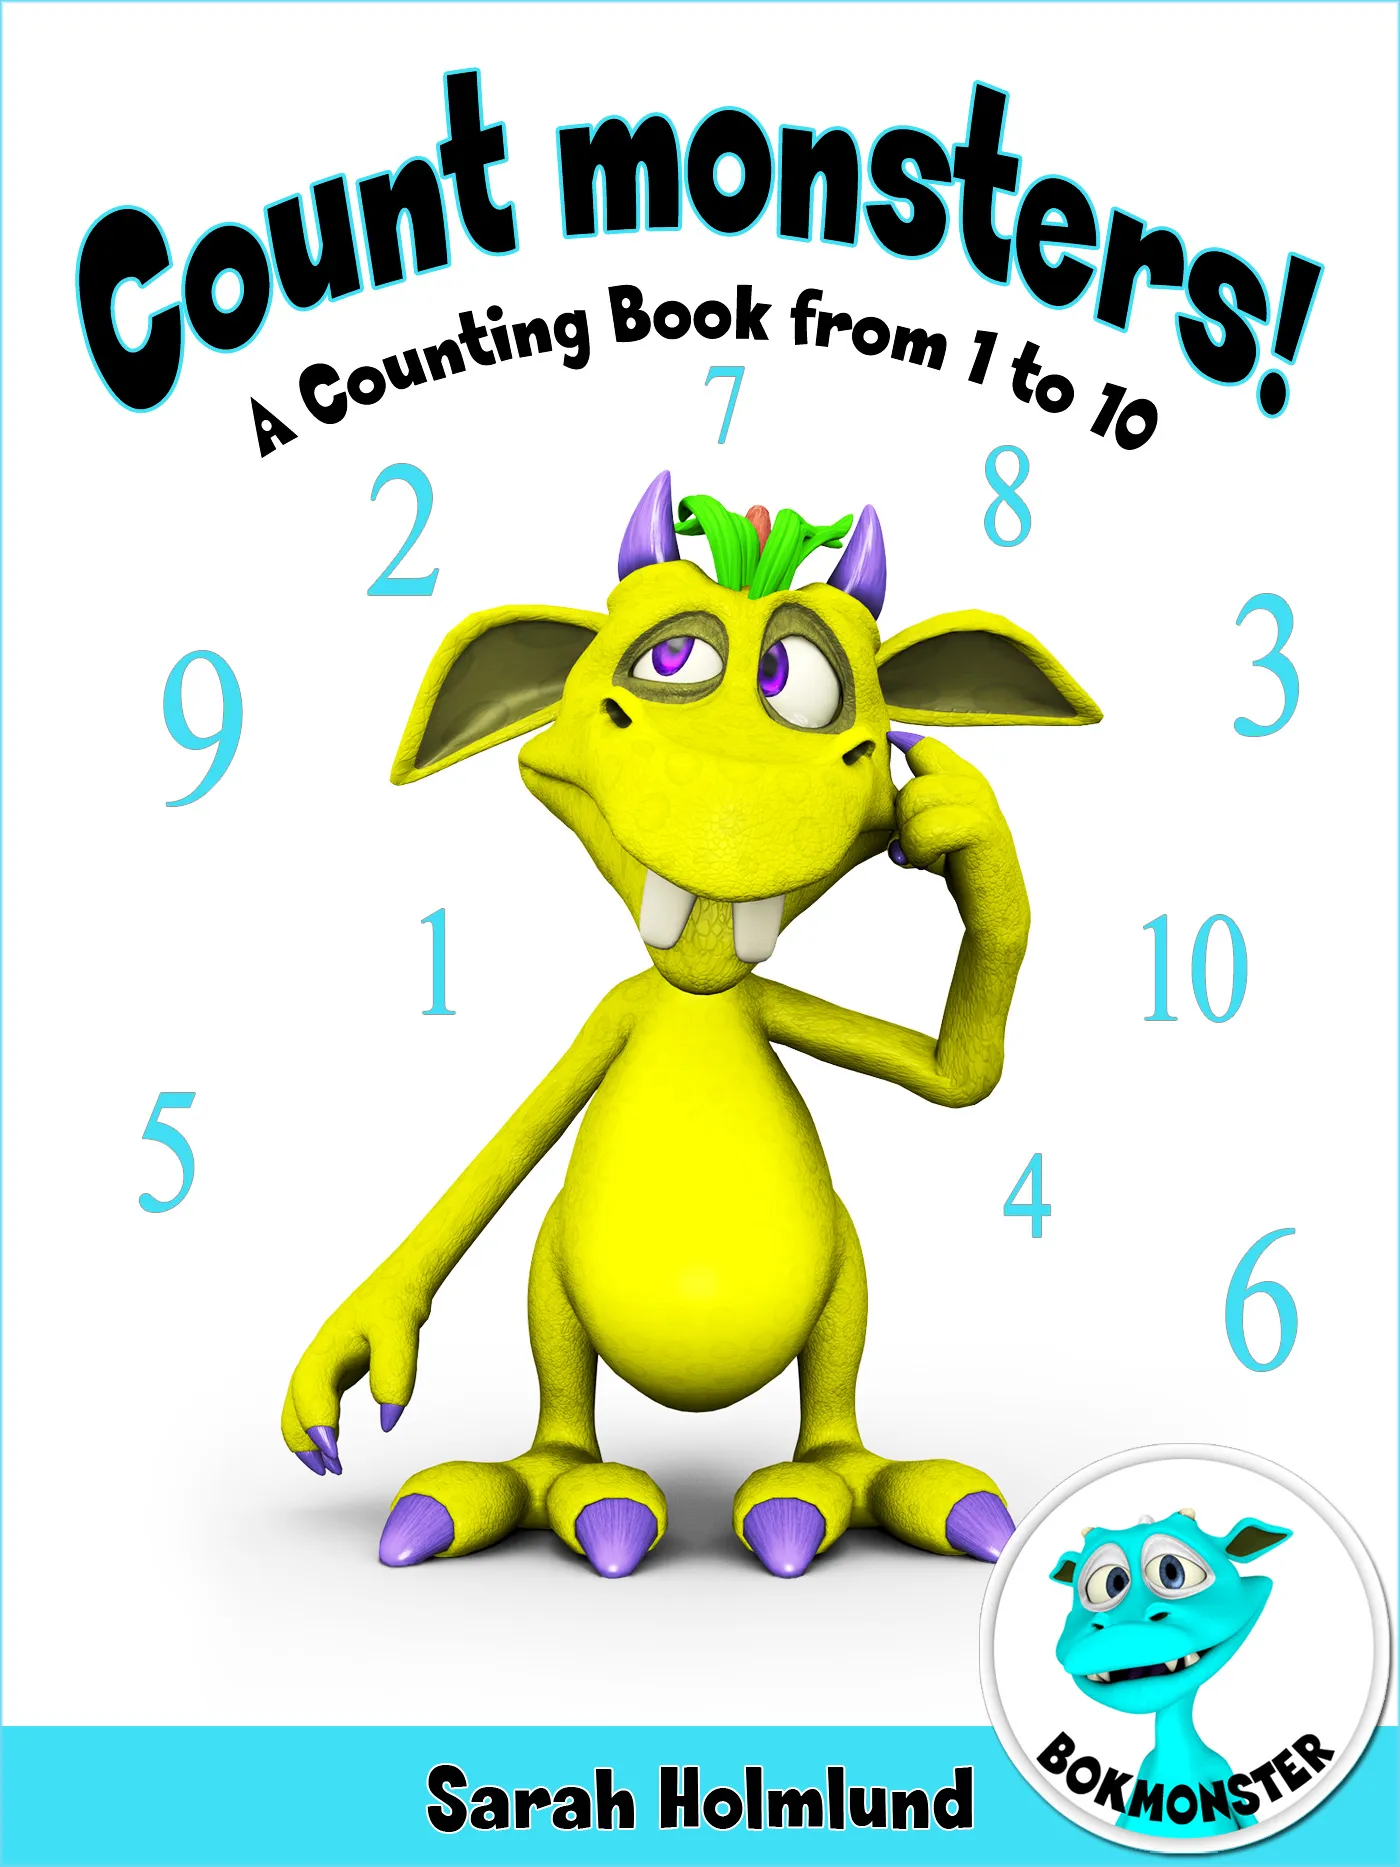 Count monsters! A Counting Book from 1 to 10, e-bok av Sarah Holmlund